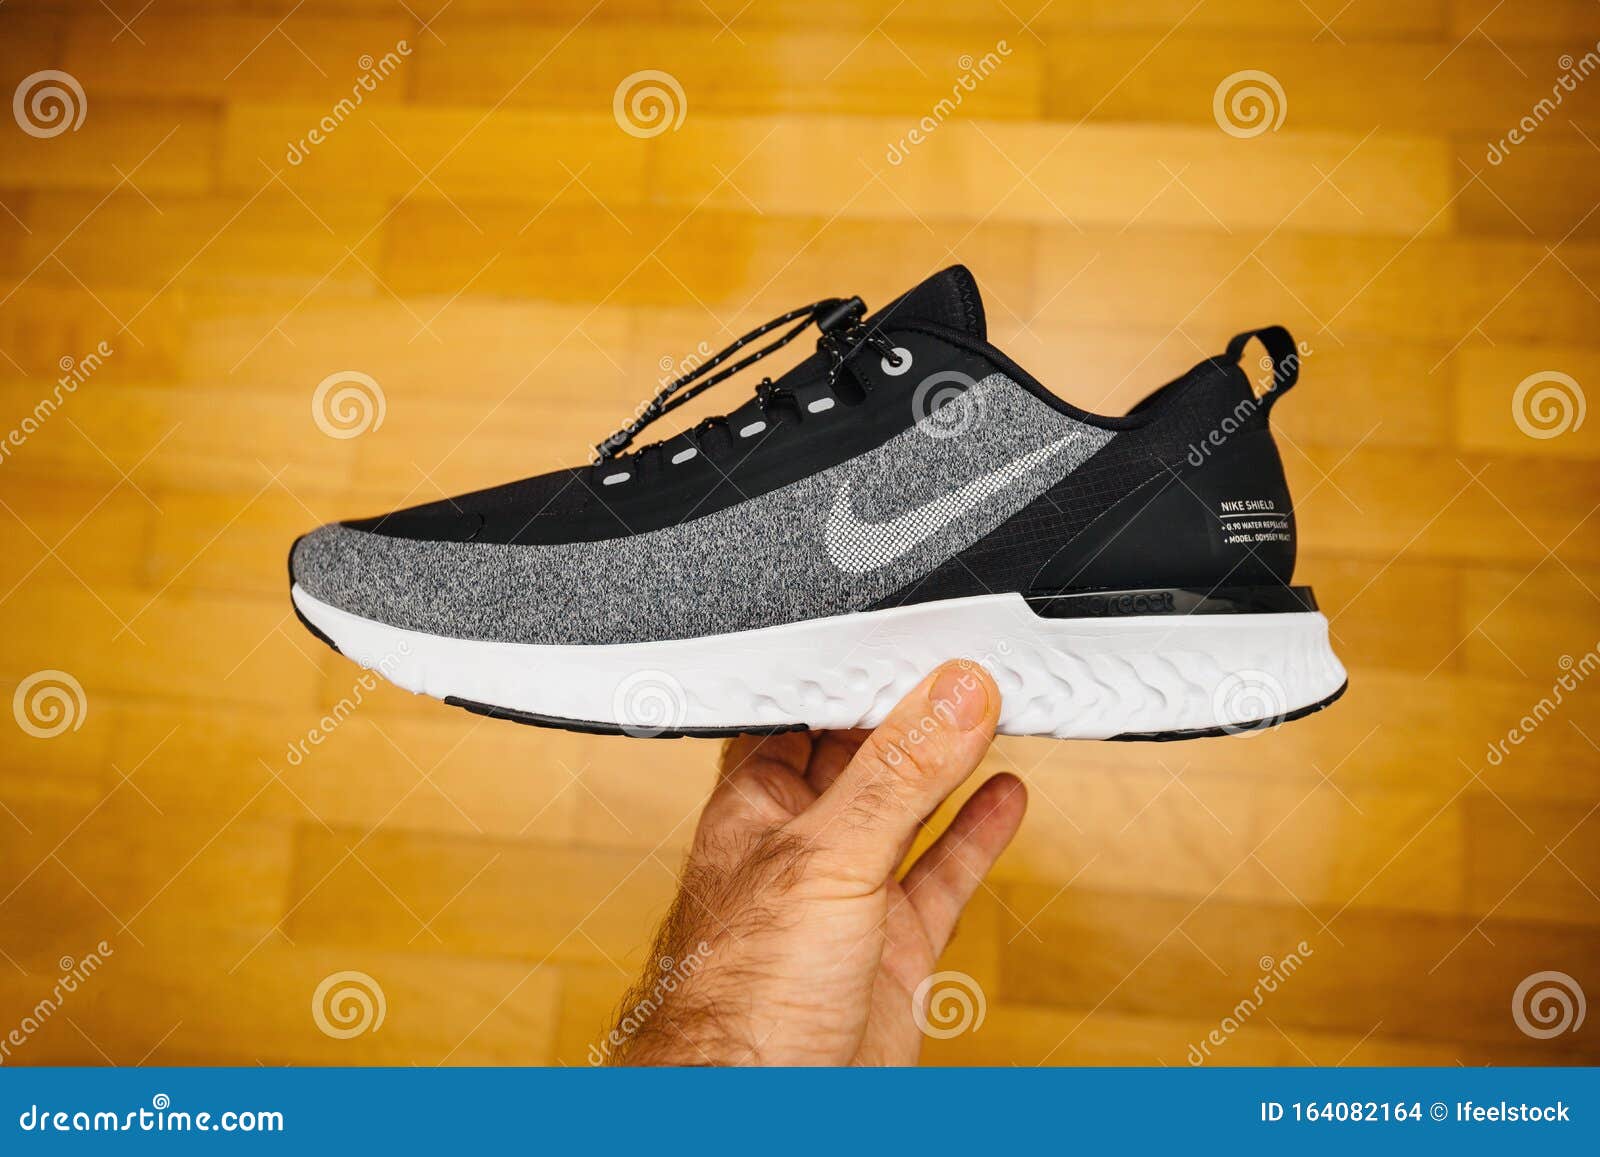 New Sport Waterproof and Windproof Running Shoe by Nike Editorial Stock  Image - Image of hardwood, isolated: 164082164